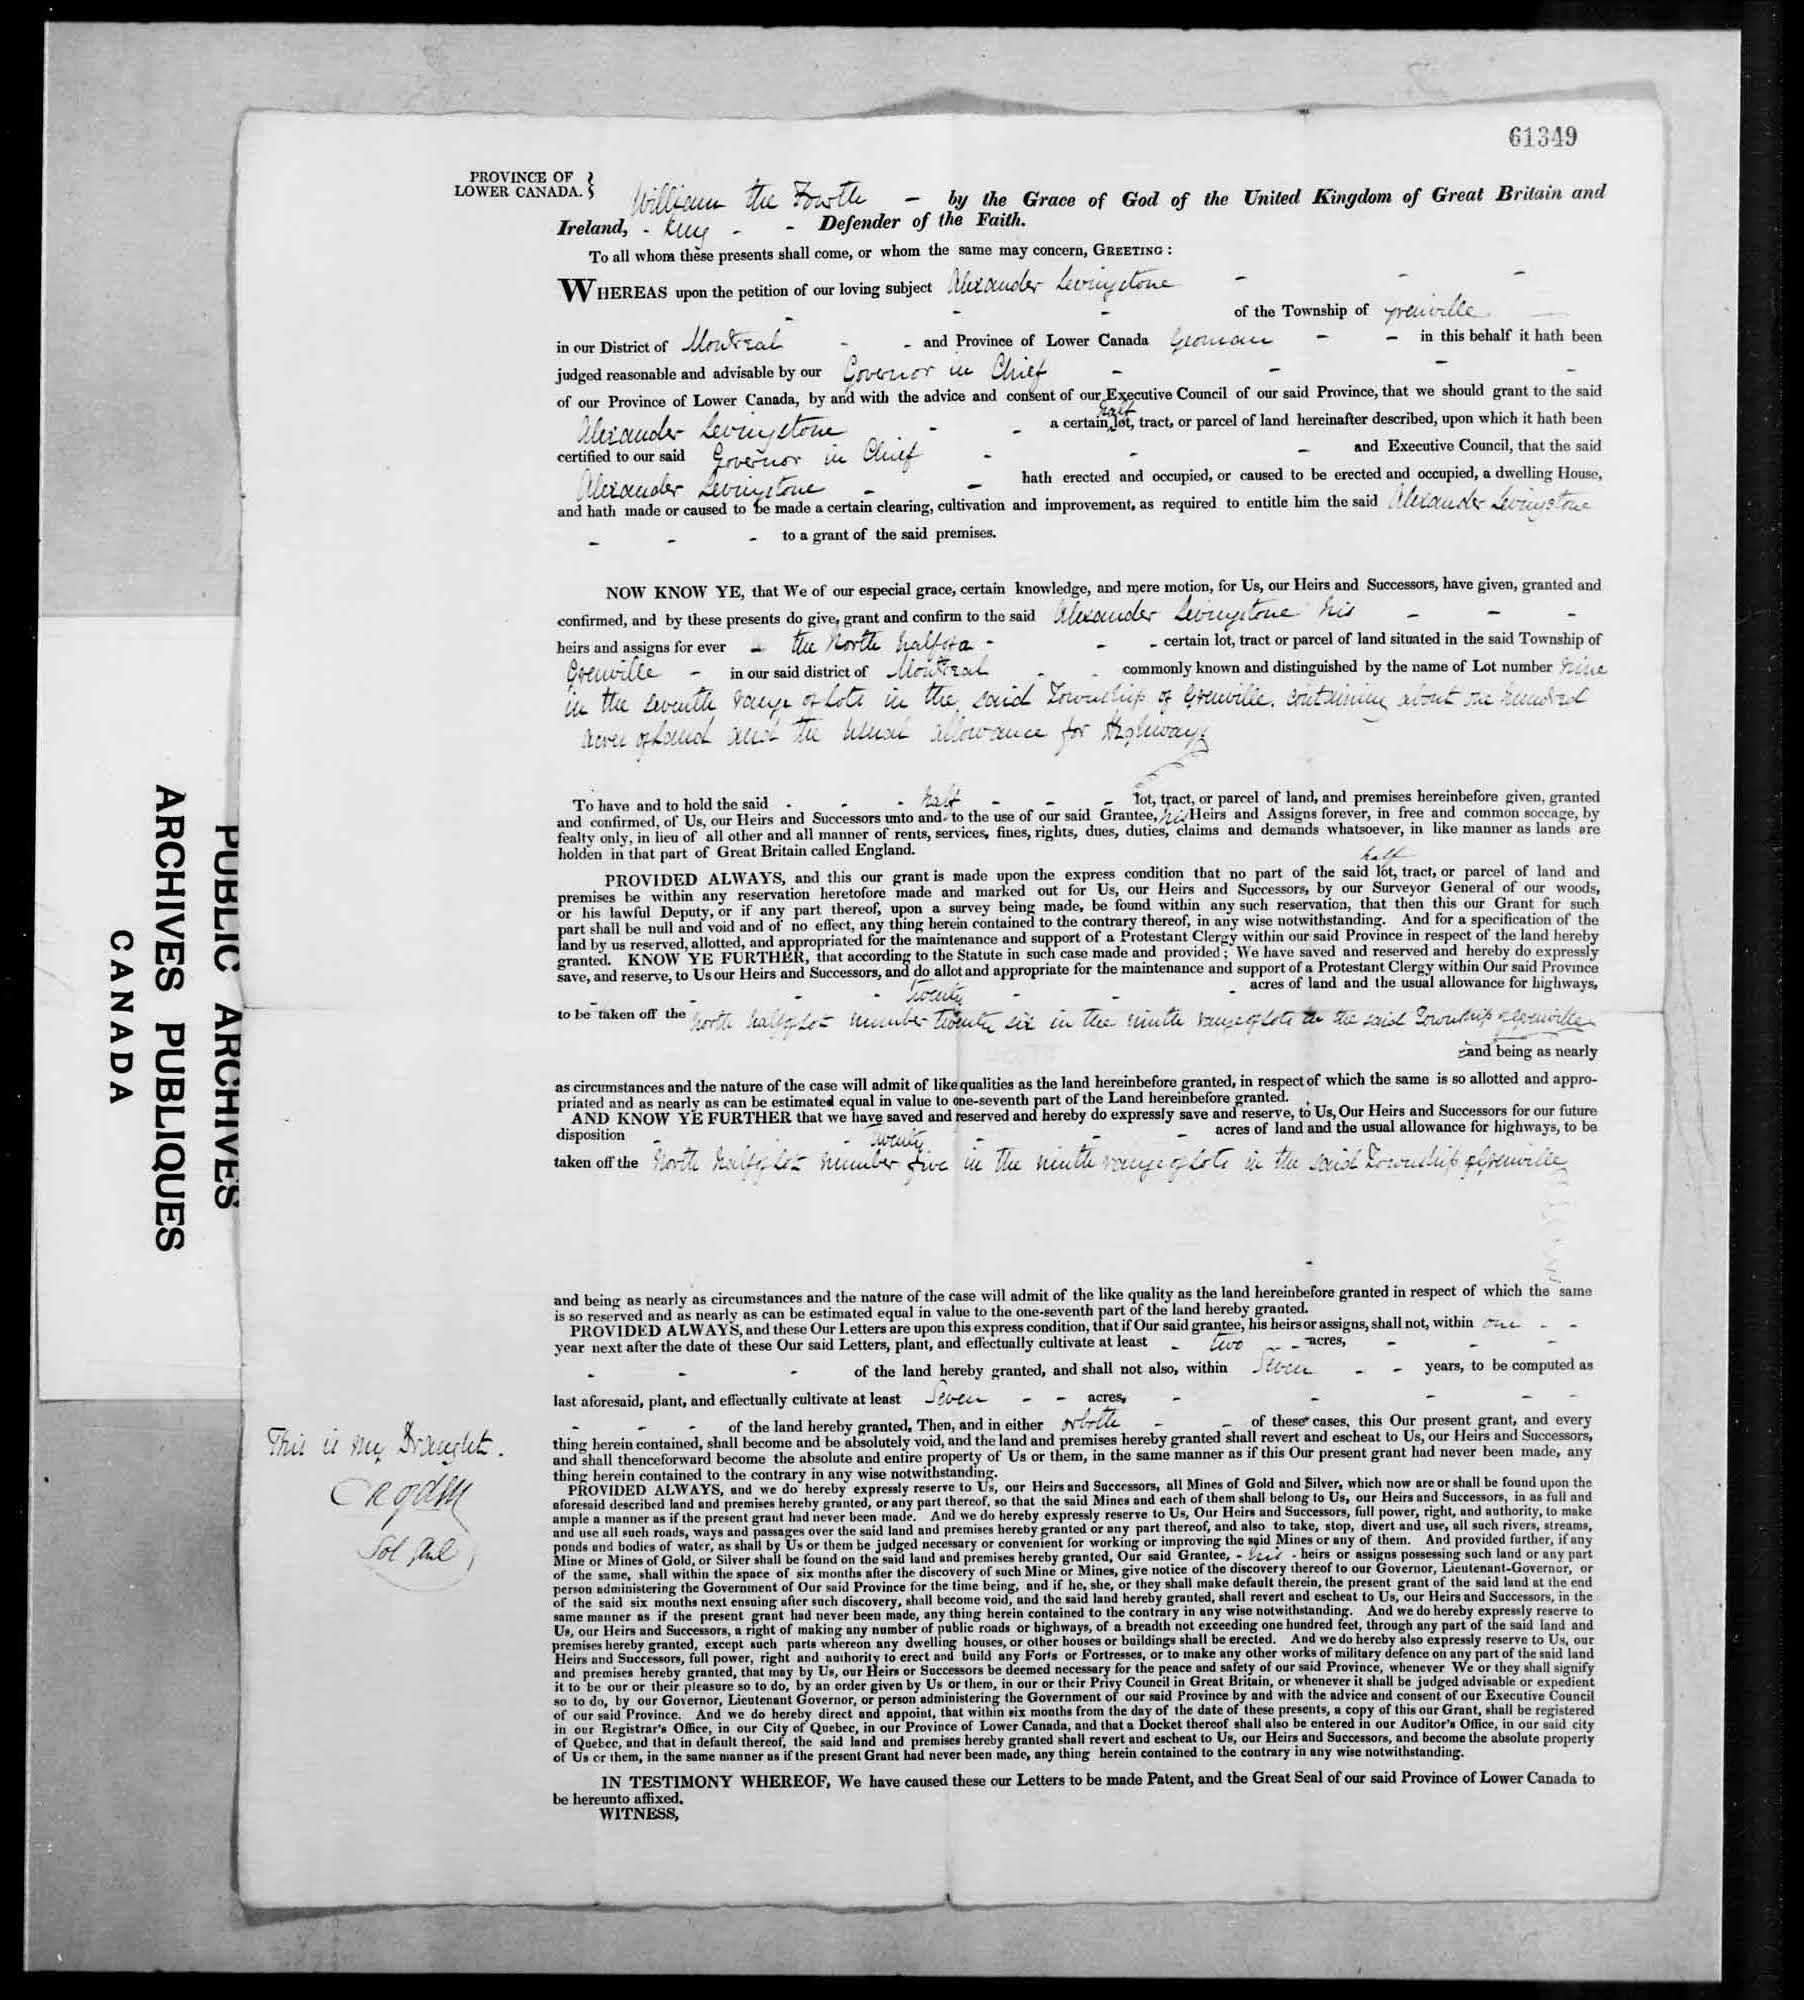 Digitized page of  for Image No.: e008706198